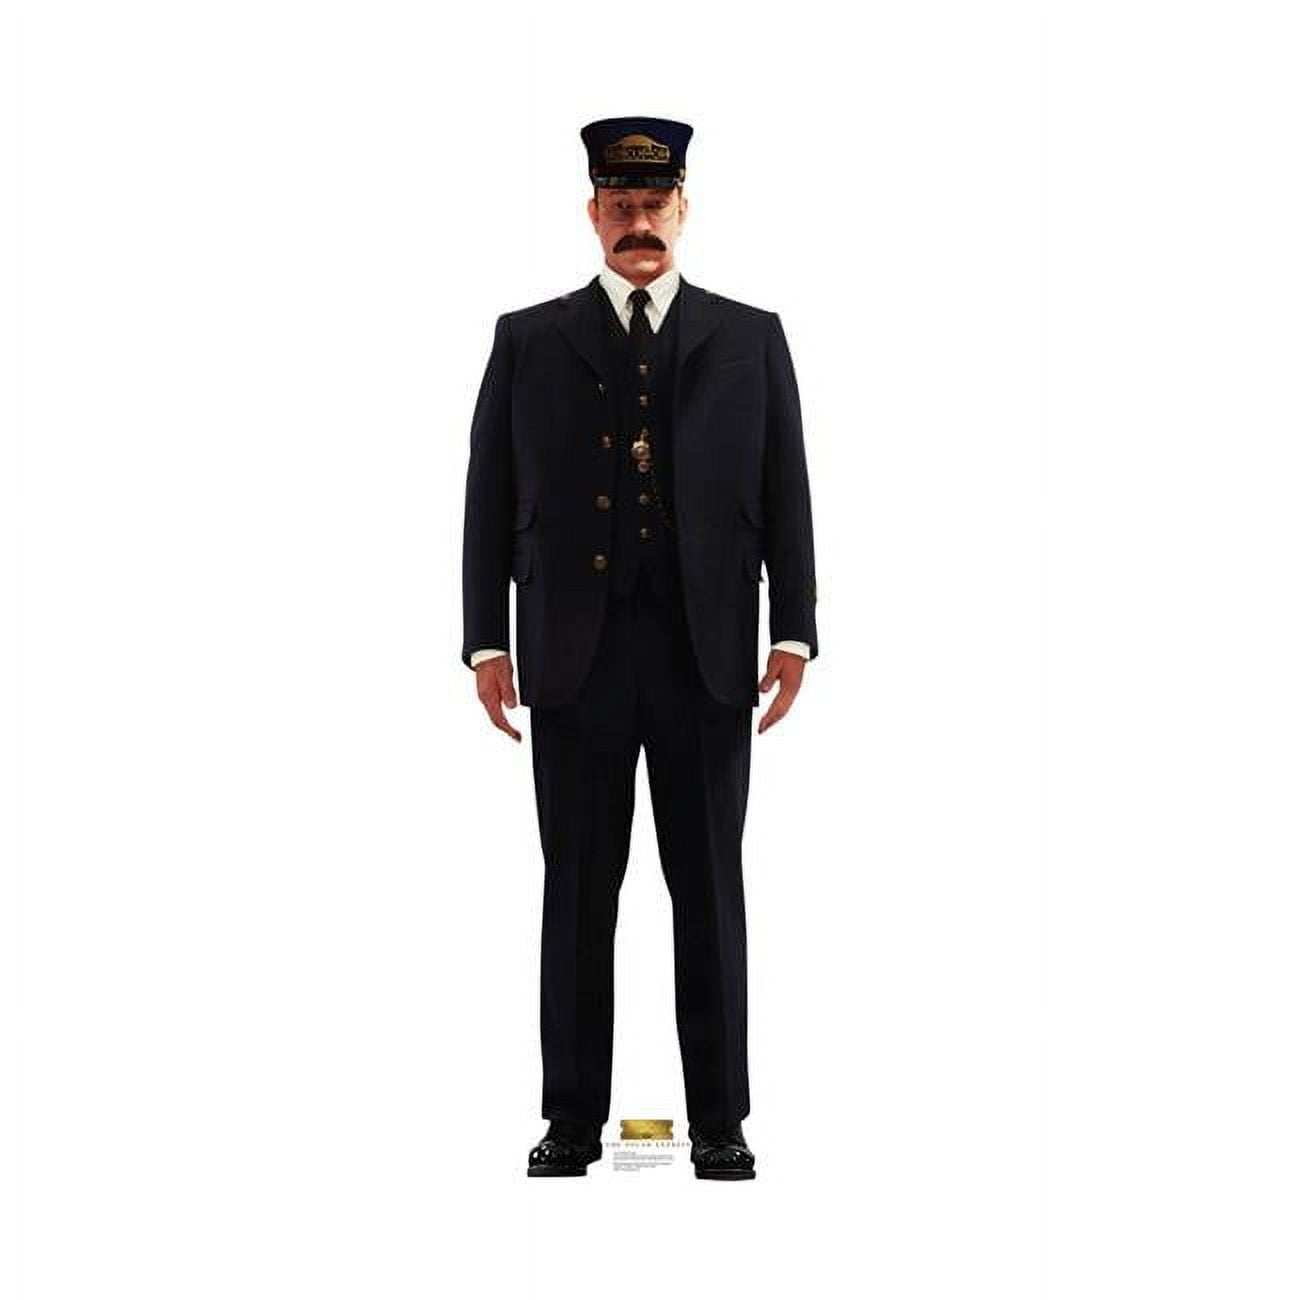 Picture of Advanced Graphics 2116 72 x 24 in. Conductor - The Polar Express Cardboard Standup